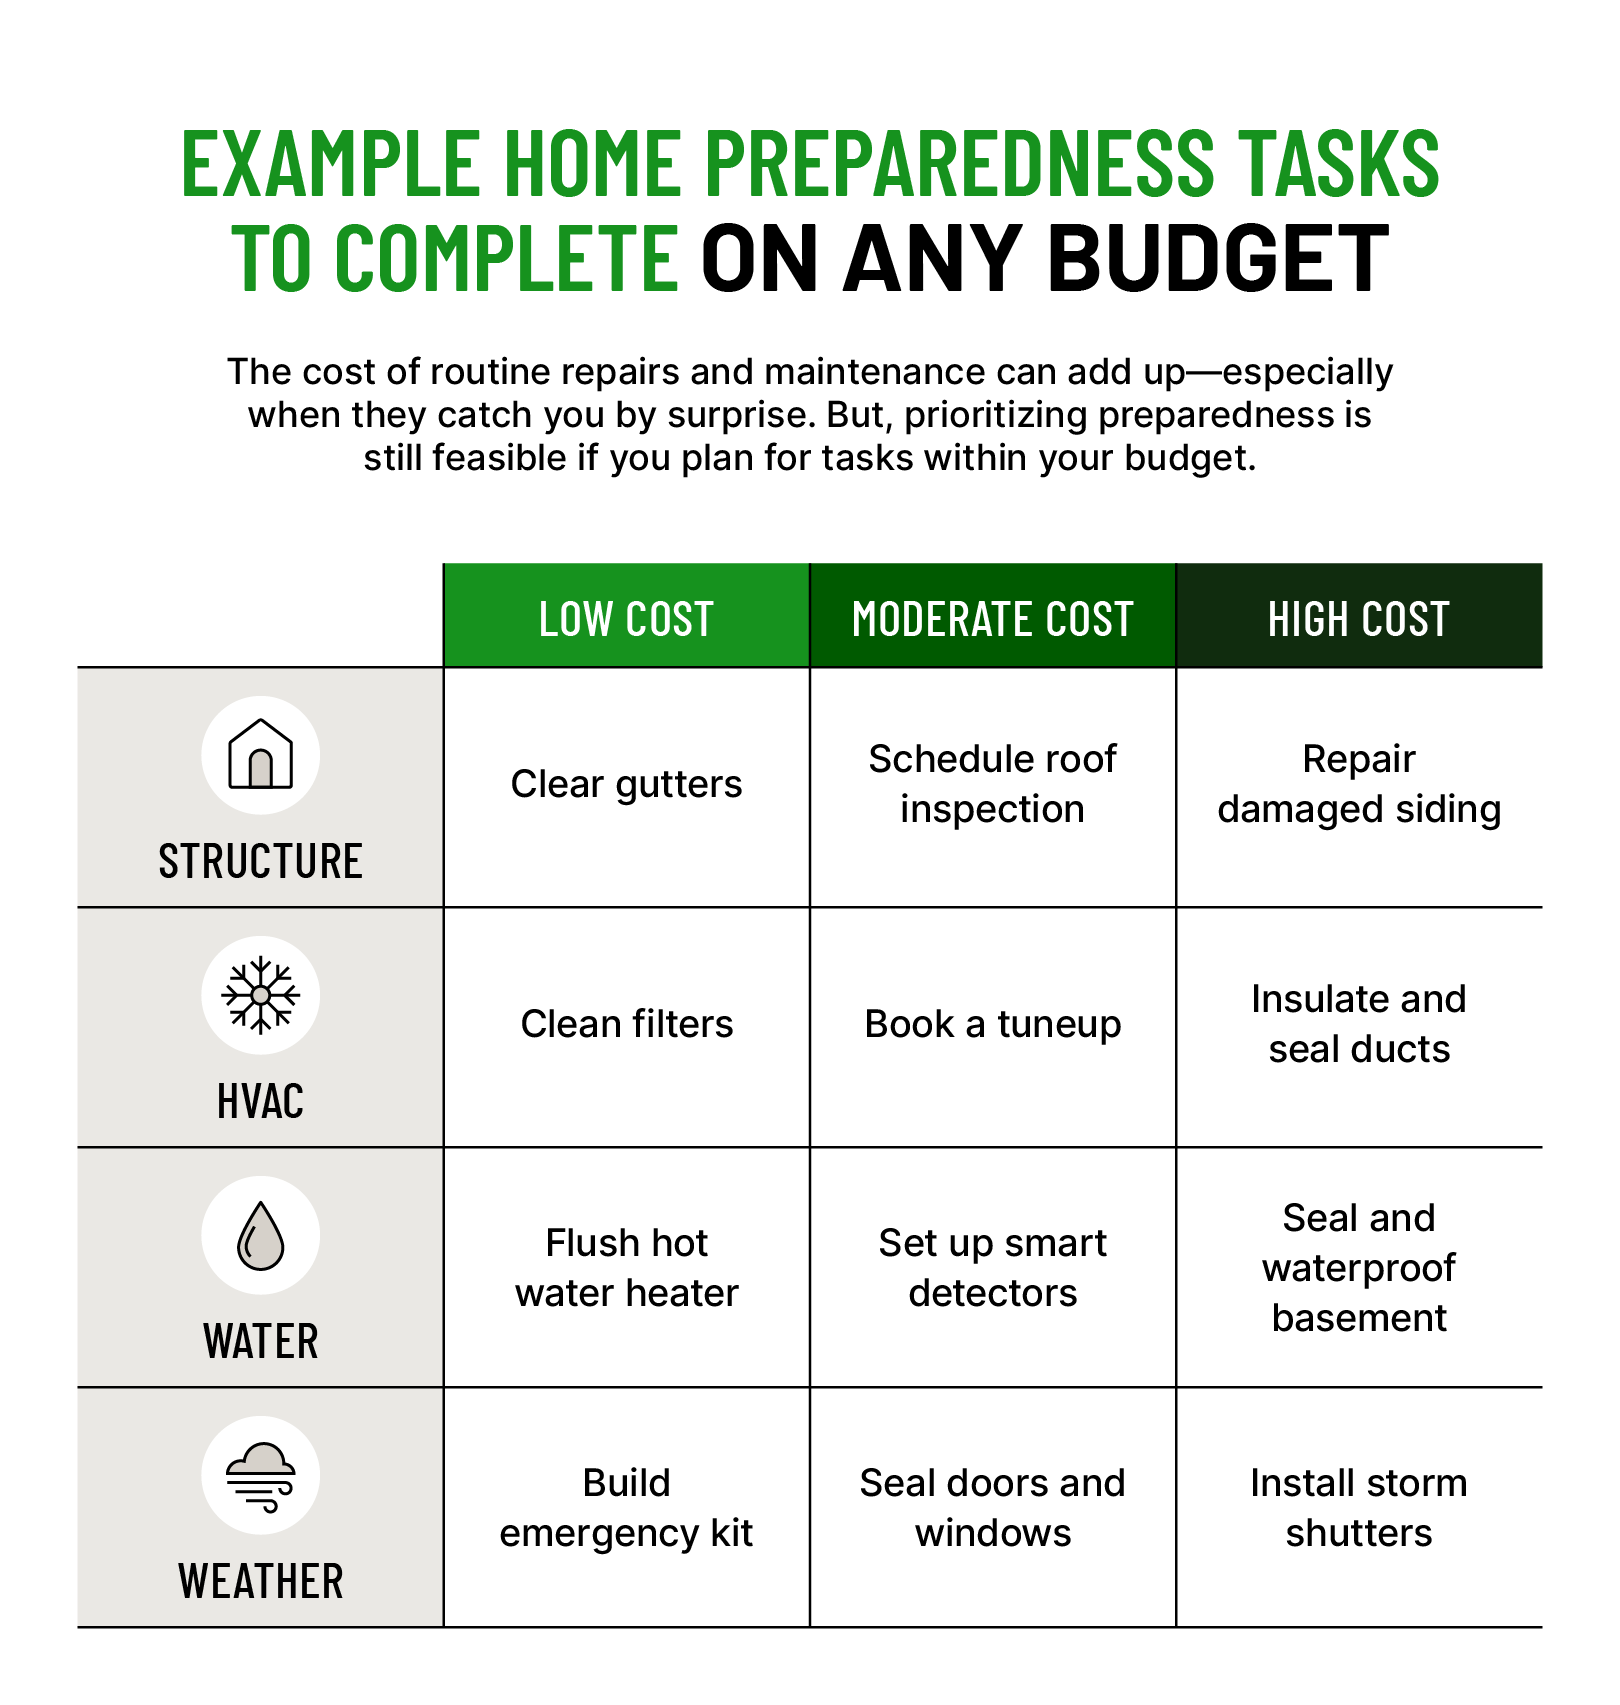 table showing examples of home preparedness tasks that homeowners can complete on any budget